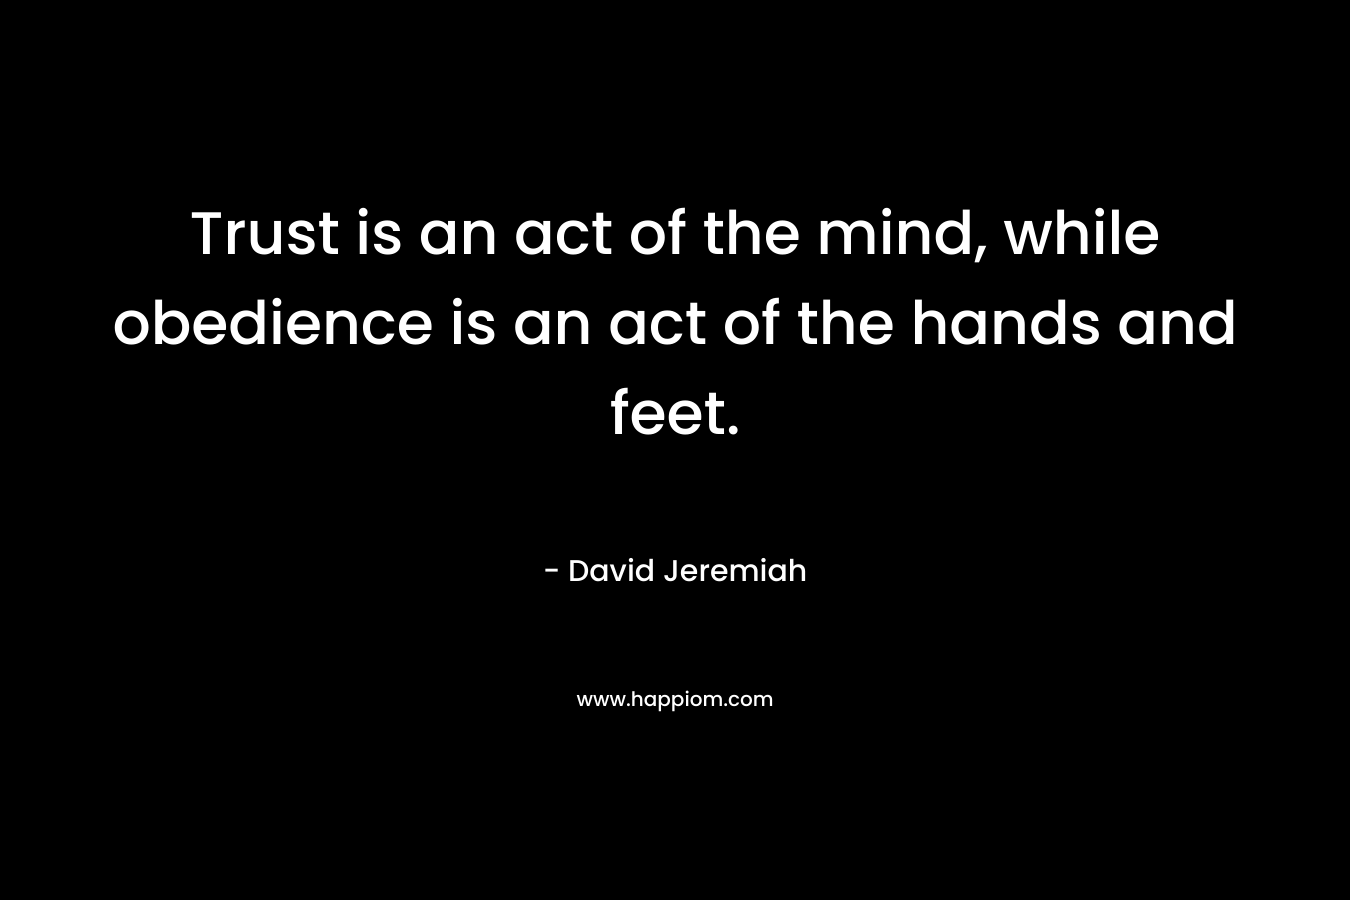 Trust is an act of the mind, while obedience is an act of the hands and feet.